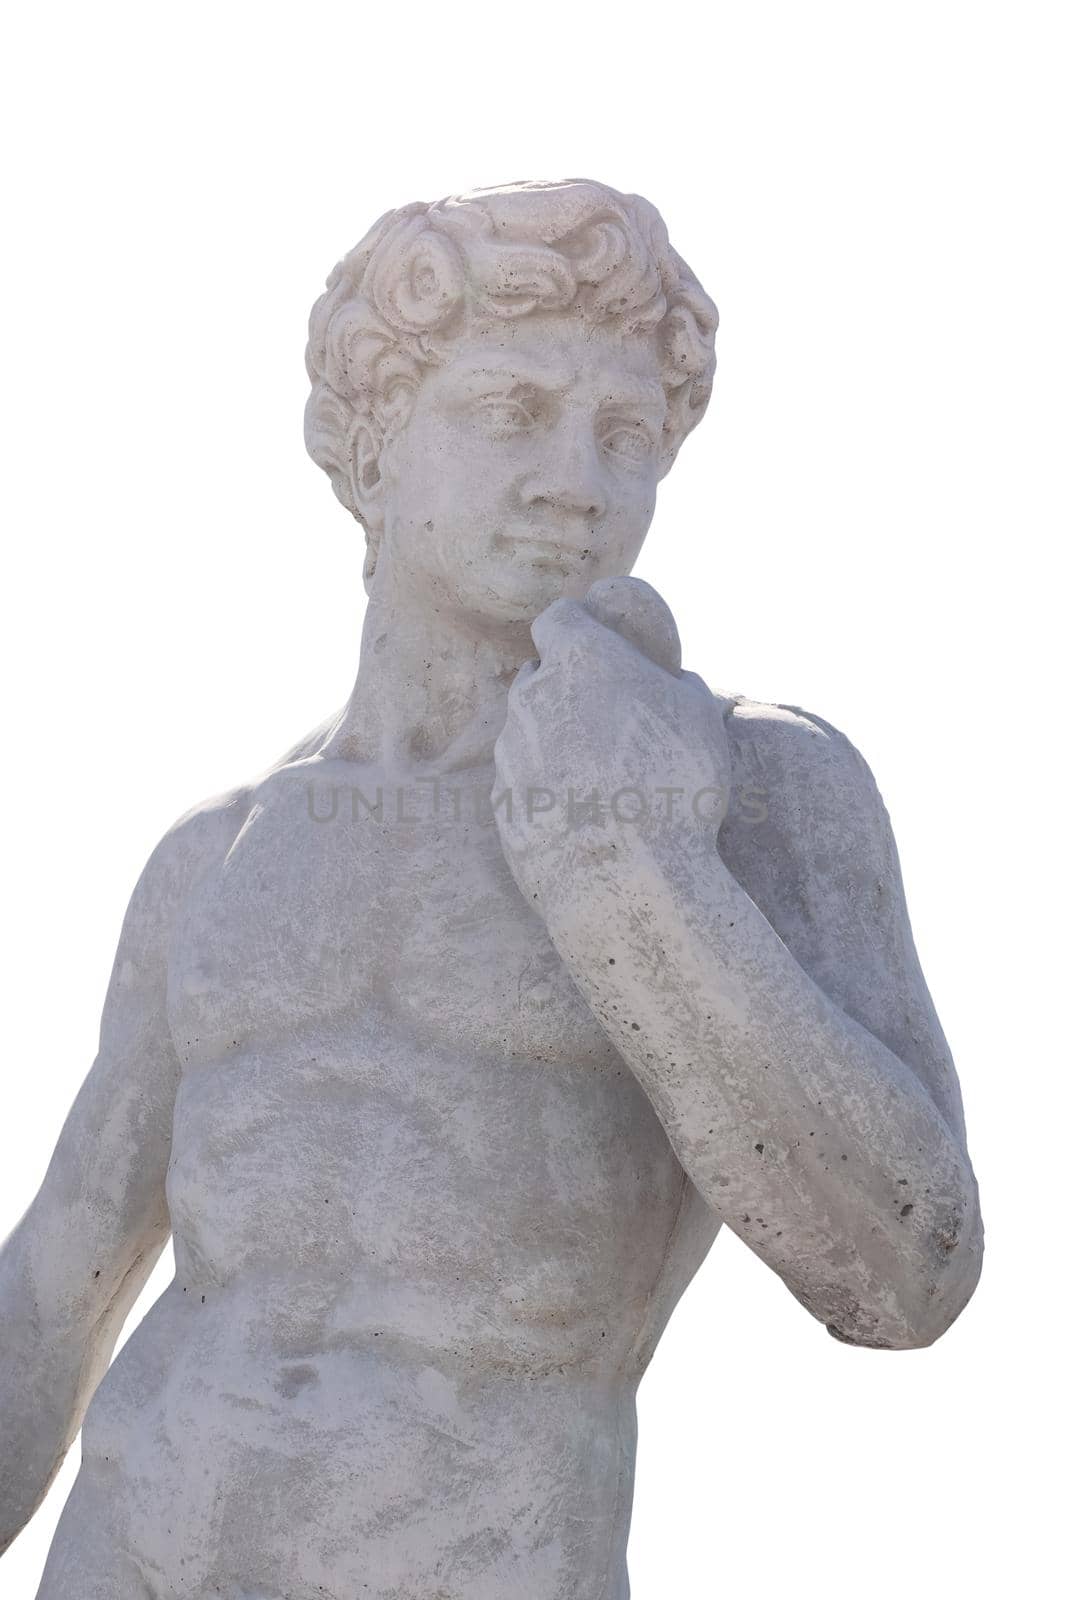 Ancient man's upper body stone sculpture on white background. art and classical style romantic figurative stone sculpture.